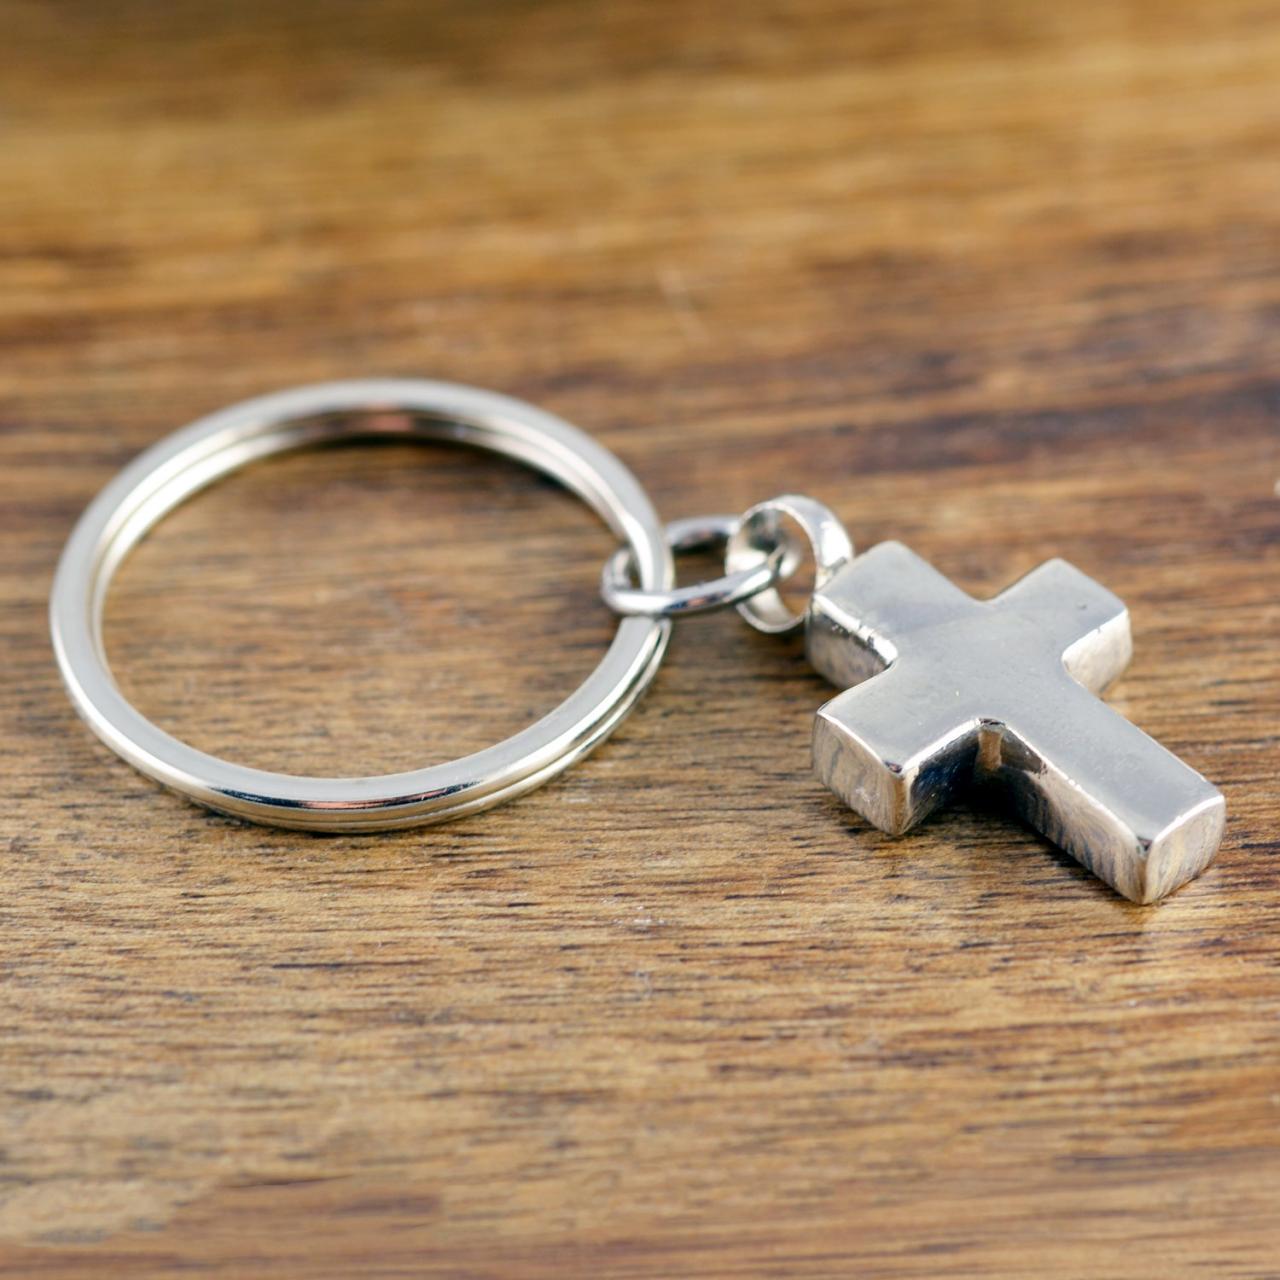 Cremation Cross Keychain, Sympathy Gift, Memorial Gift, Cremation Keychain, Personalized Cross Keychain, Ash Jewelry, Funeral Gifts